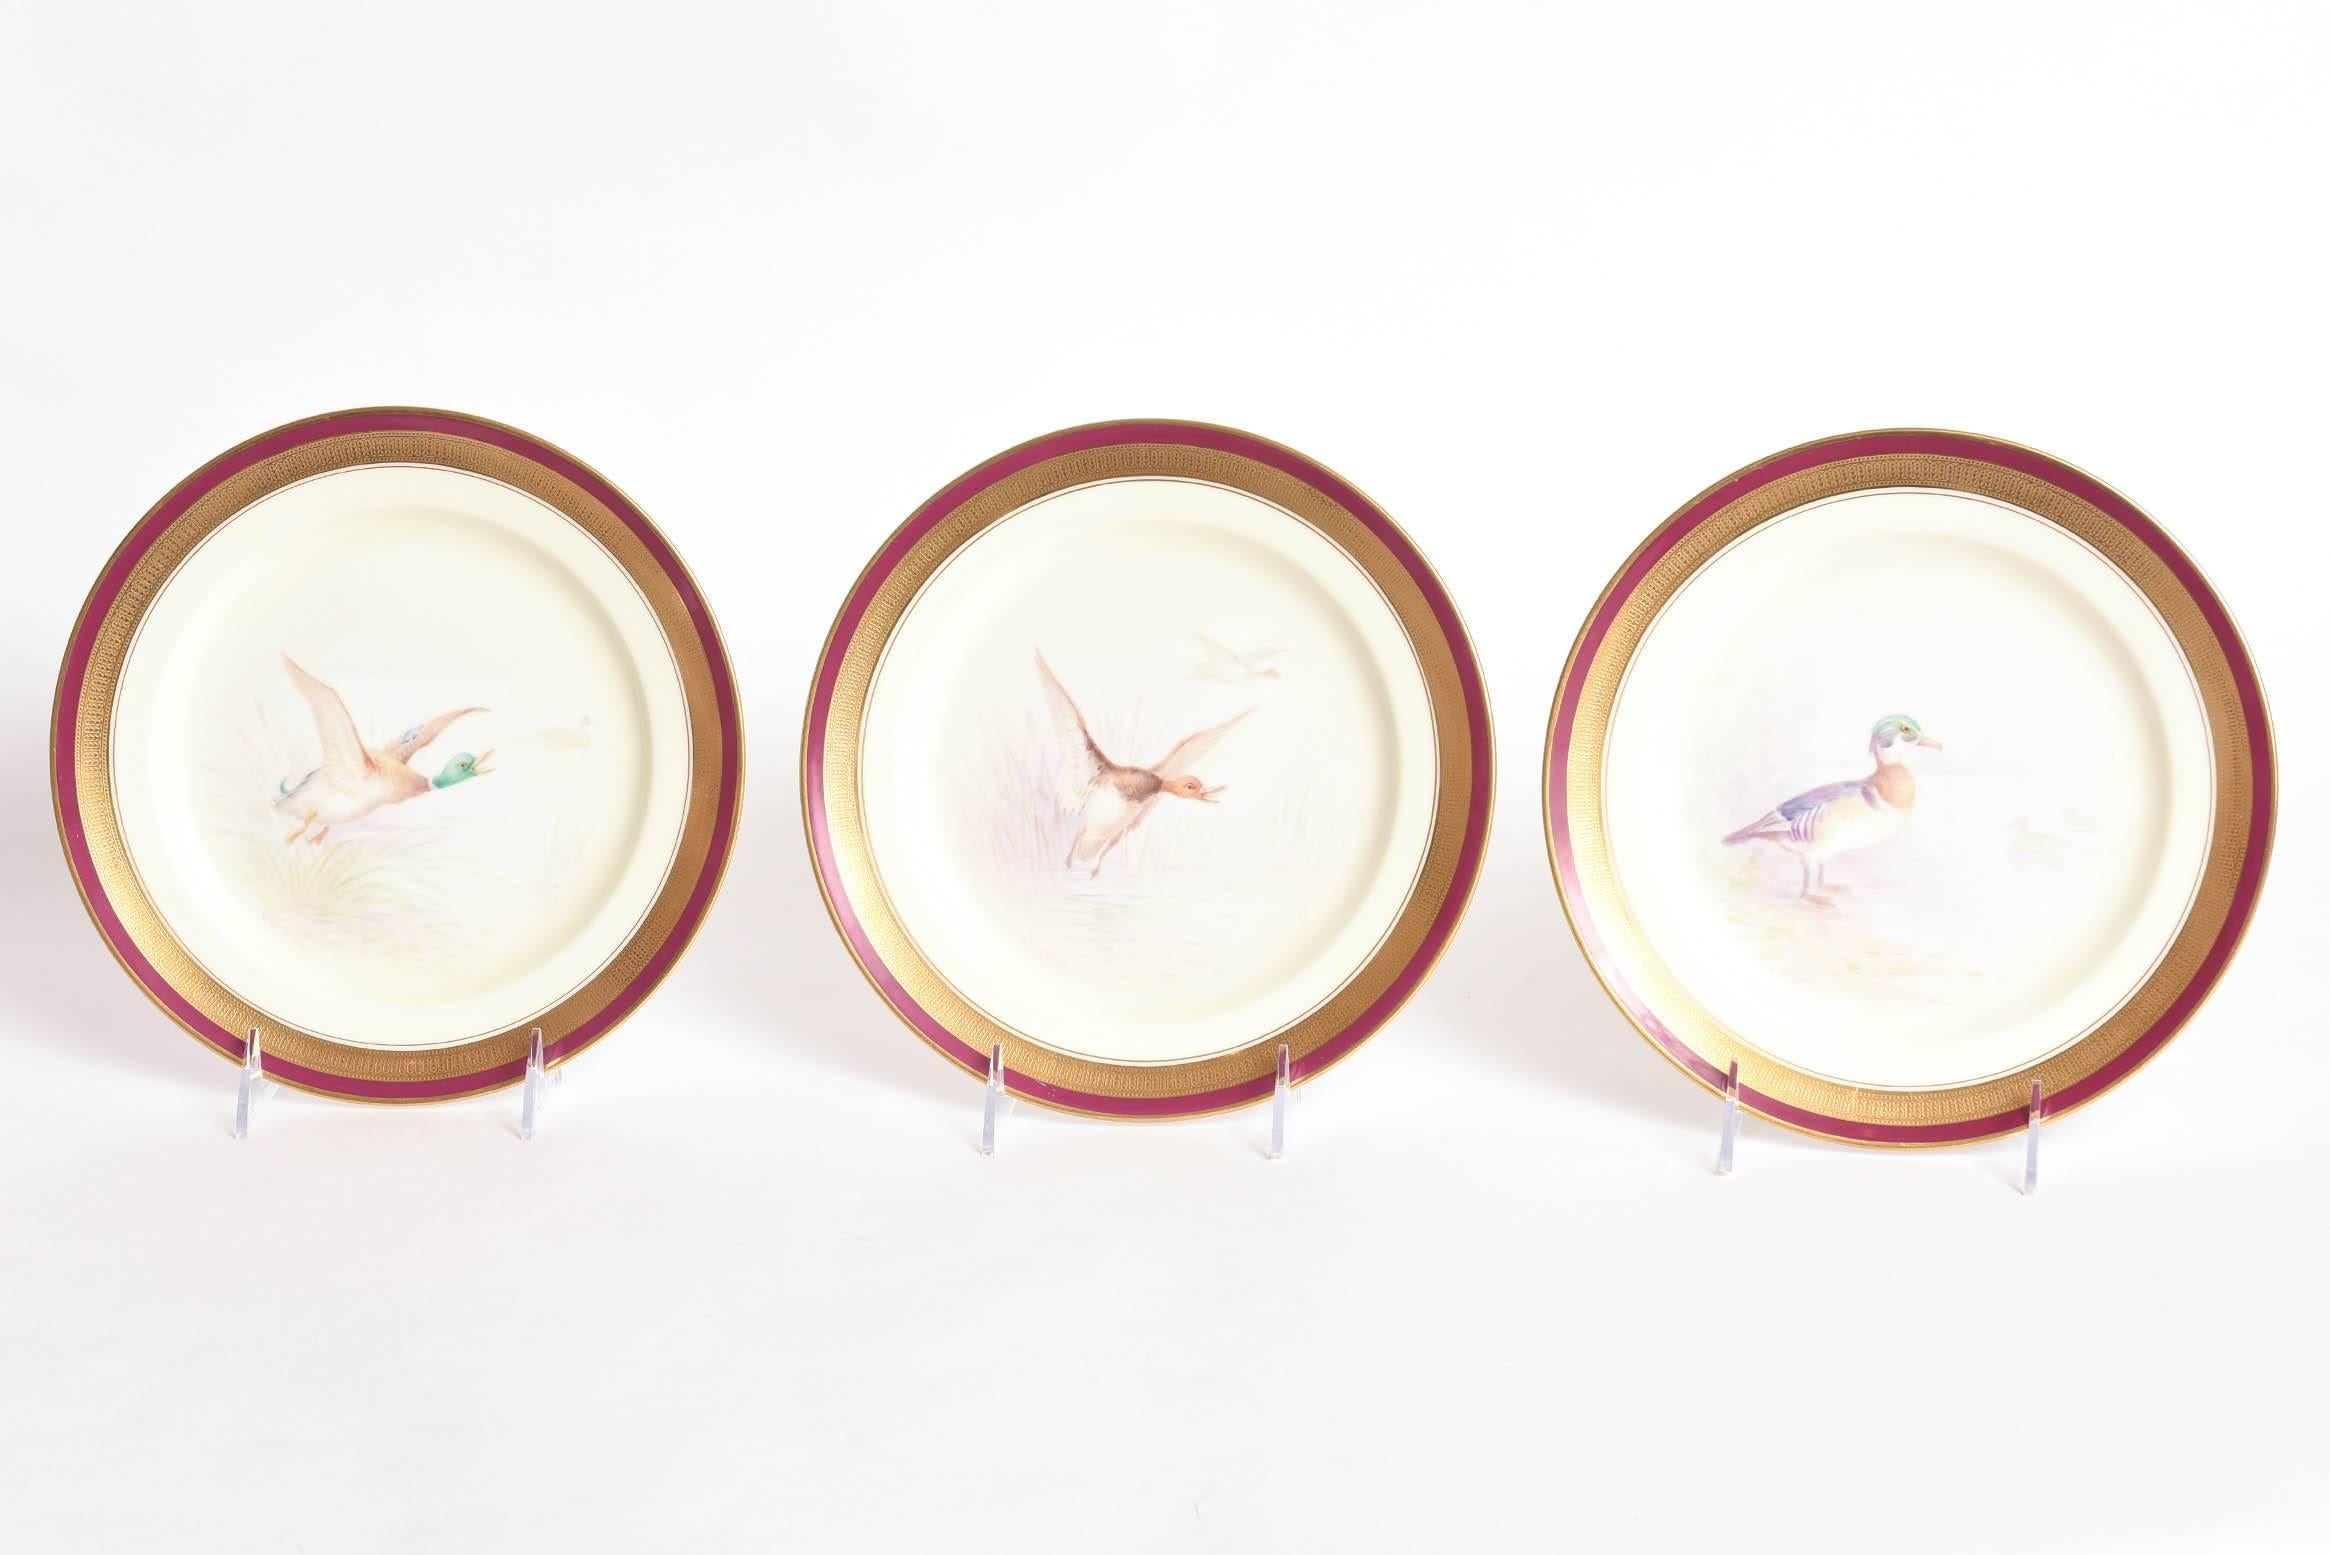 12 Game Bird Plates, Hand-Painted & Artist Signed. Rare Ruby Red Border, Antique 3